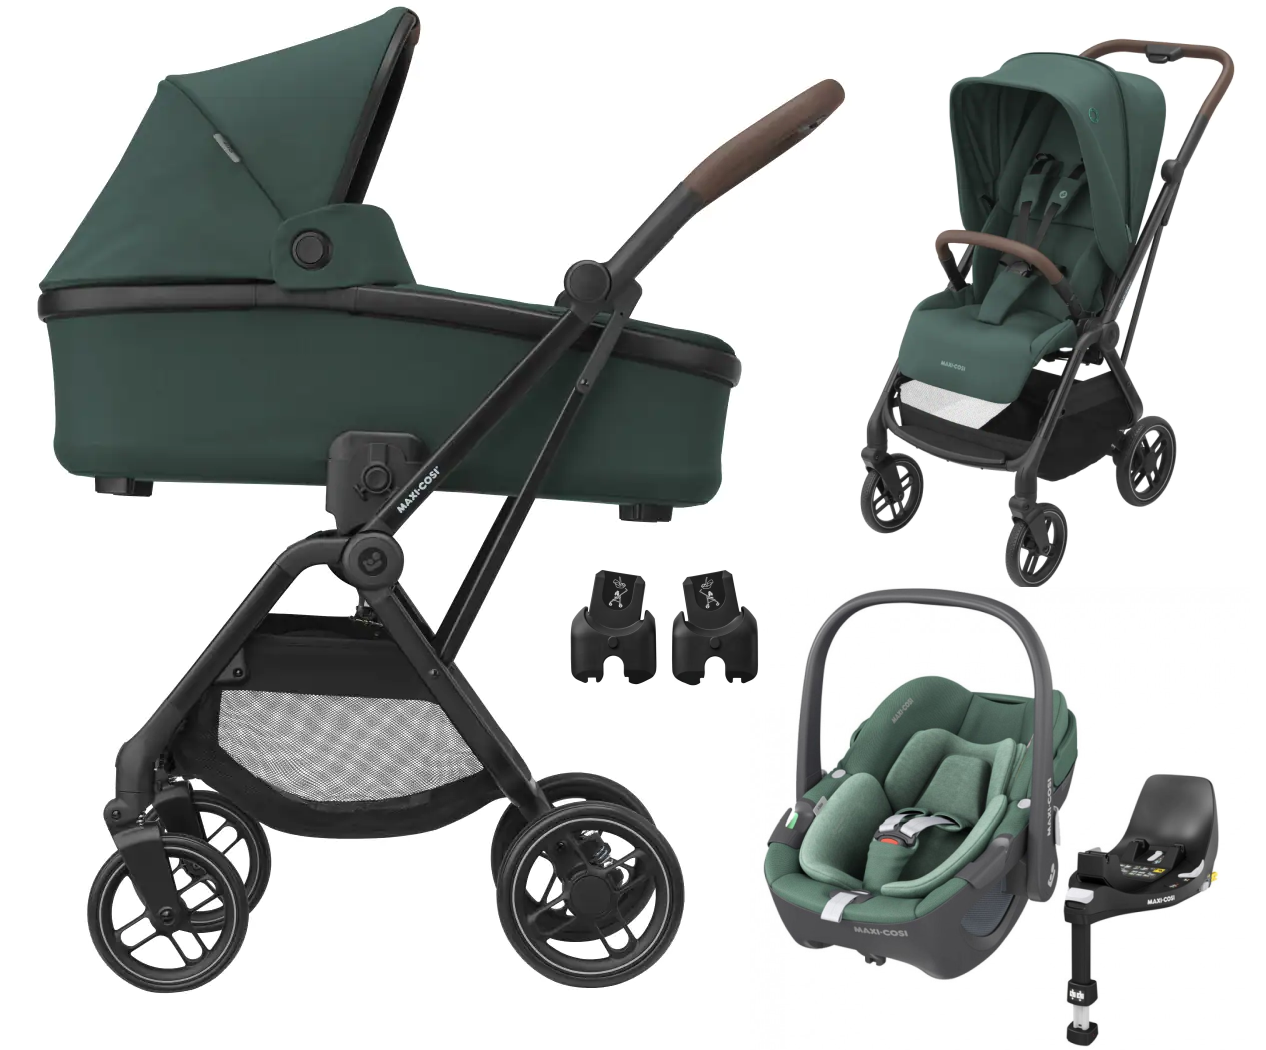 https://kinderprams.com/eng_pl_Maxi-Cosi-LEONA-2-Travel-System-4-in-1-set-with-Maxi-Cosi-PEBBLE-360-I-SIZE-car-seat-and-FAMILYFIX-360-base-4826_4.png